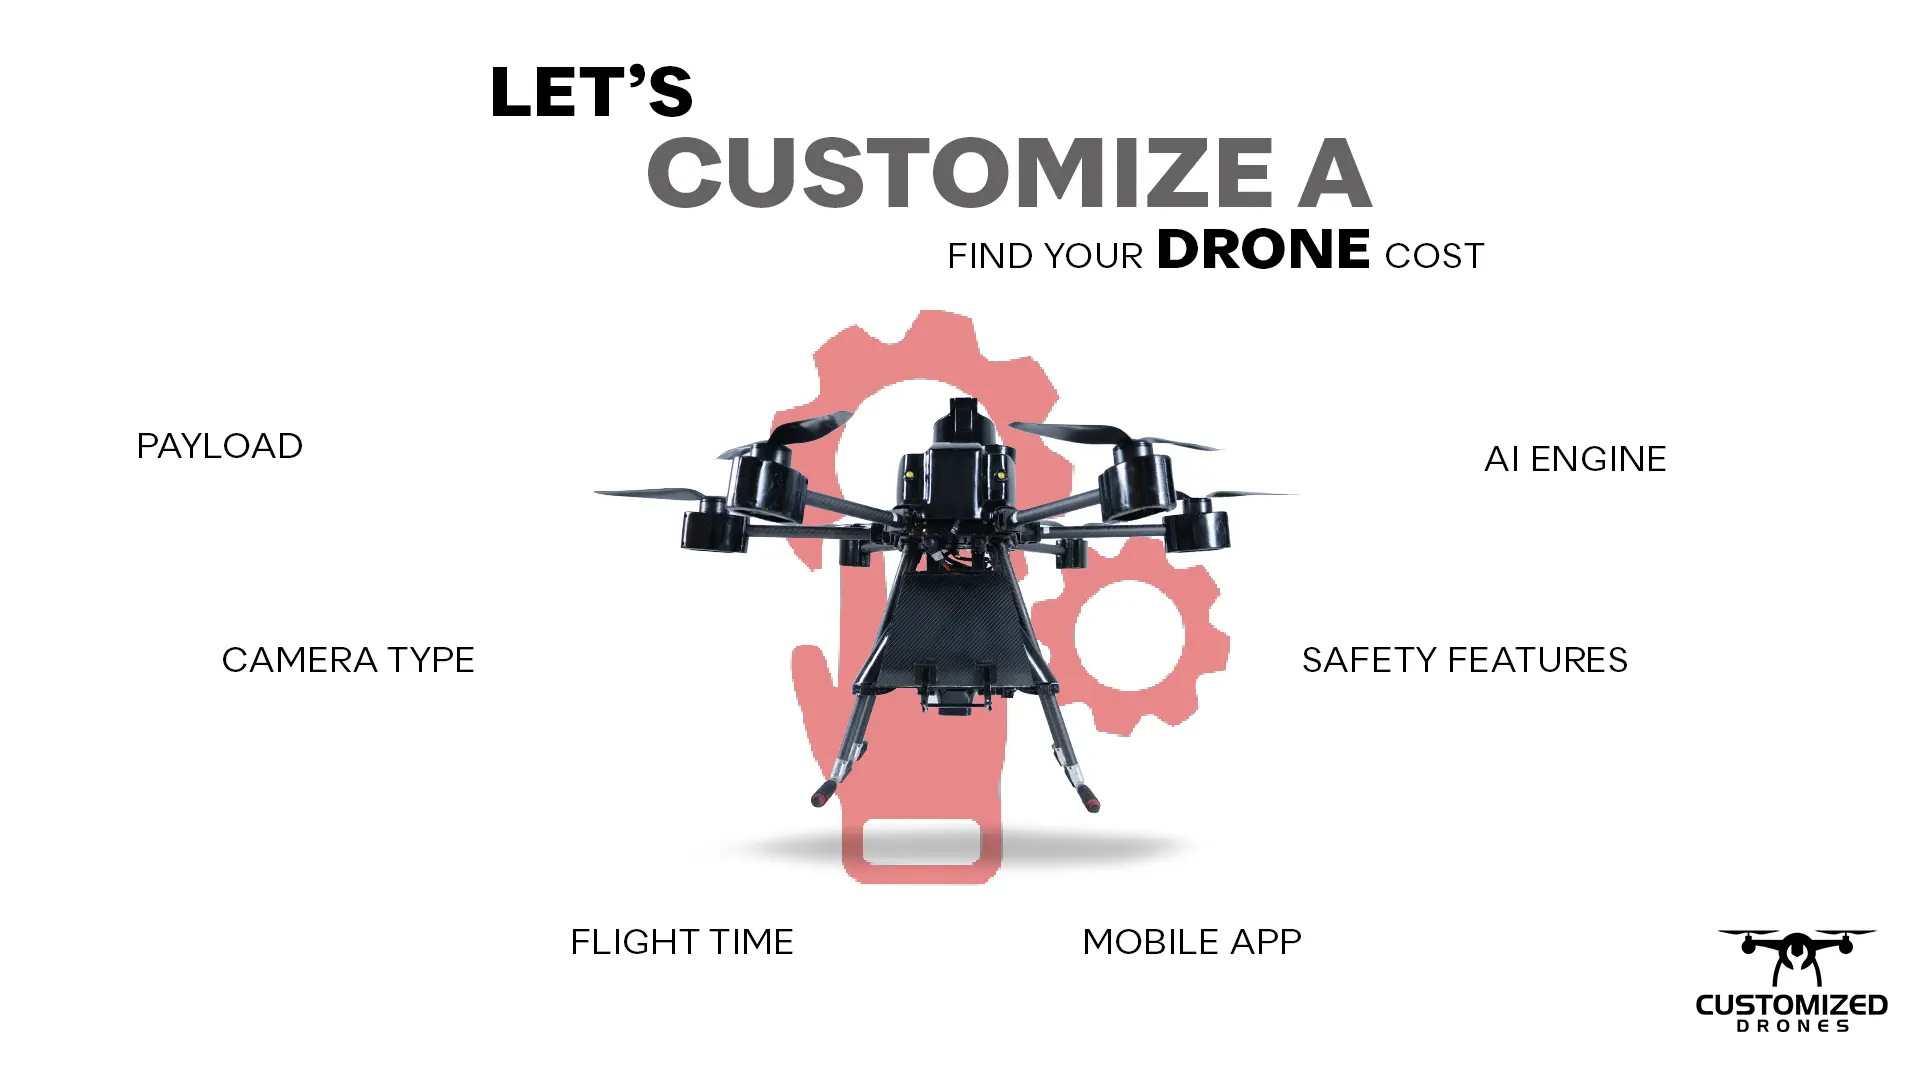 Lets Customize a drone